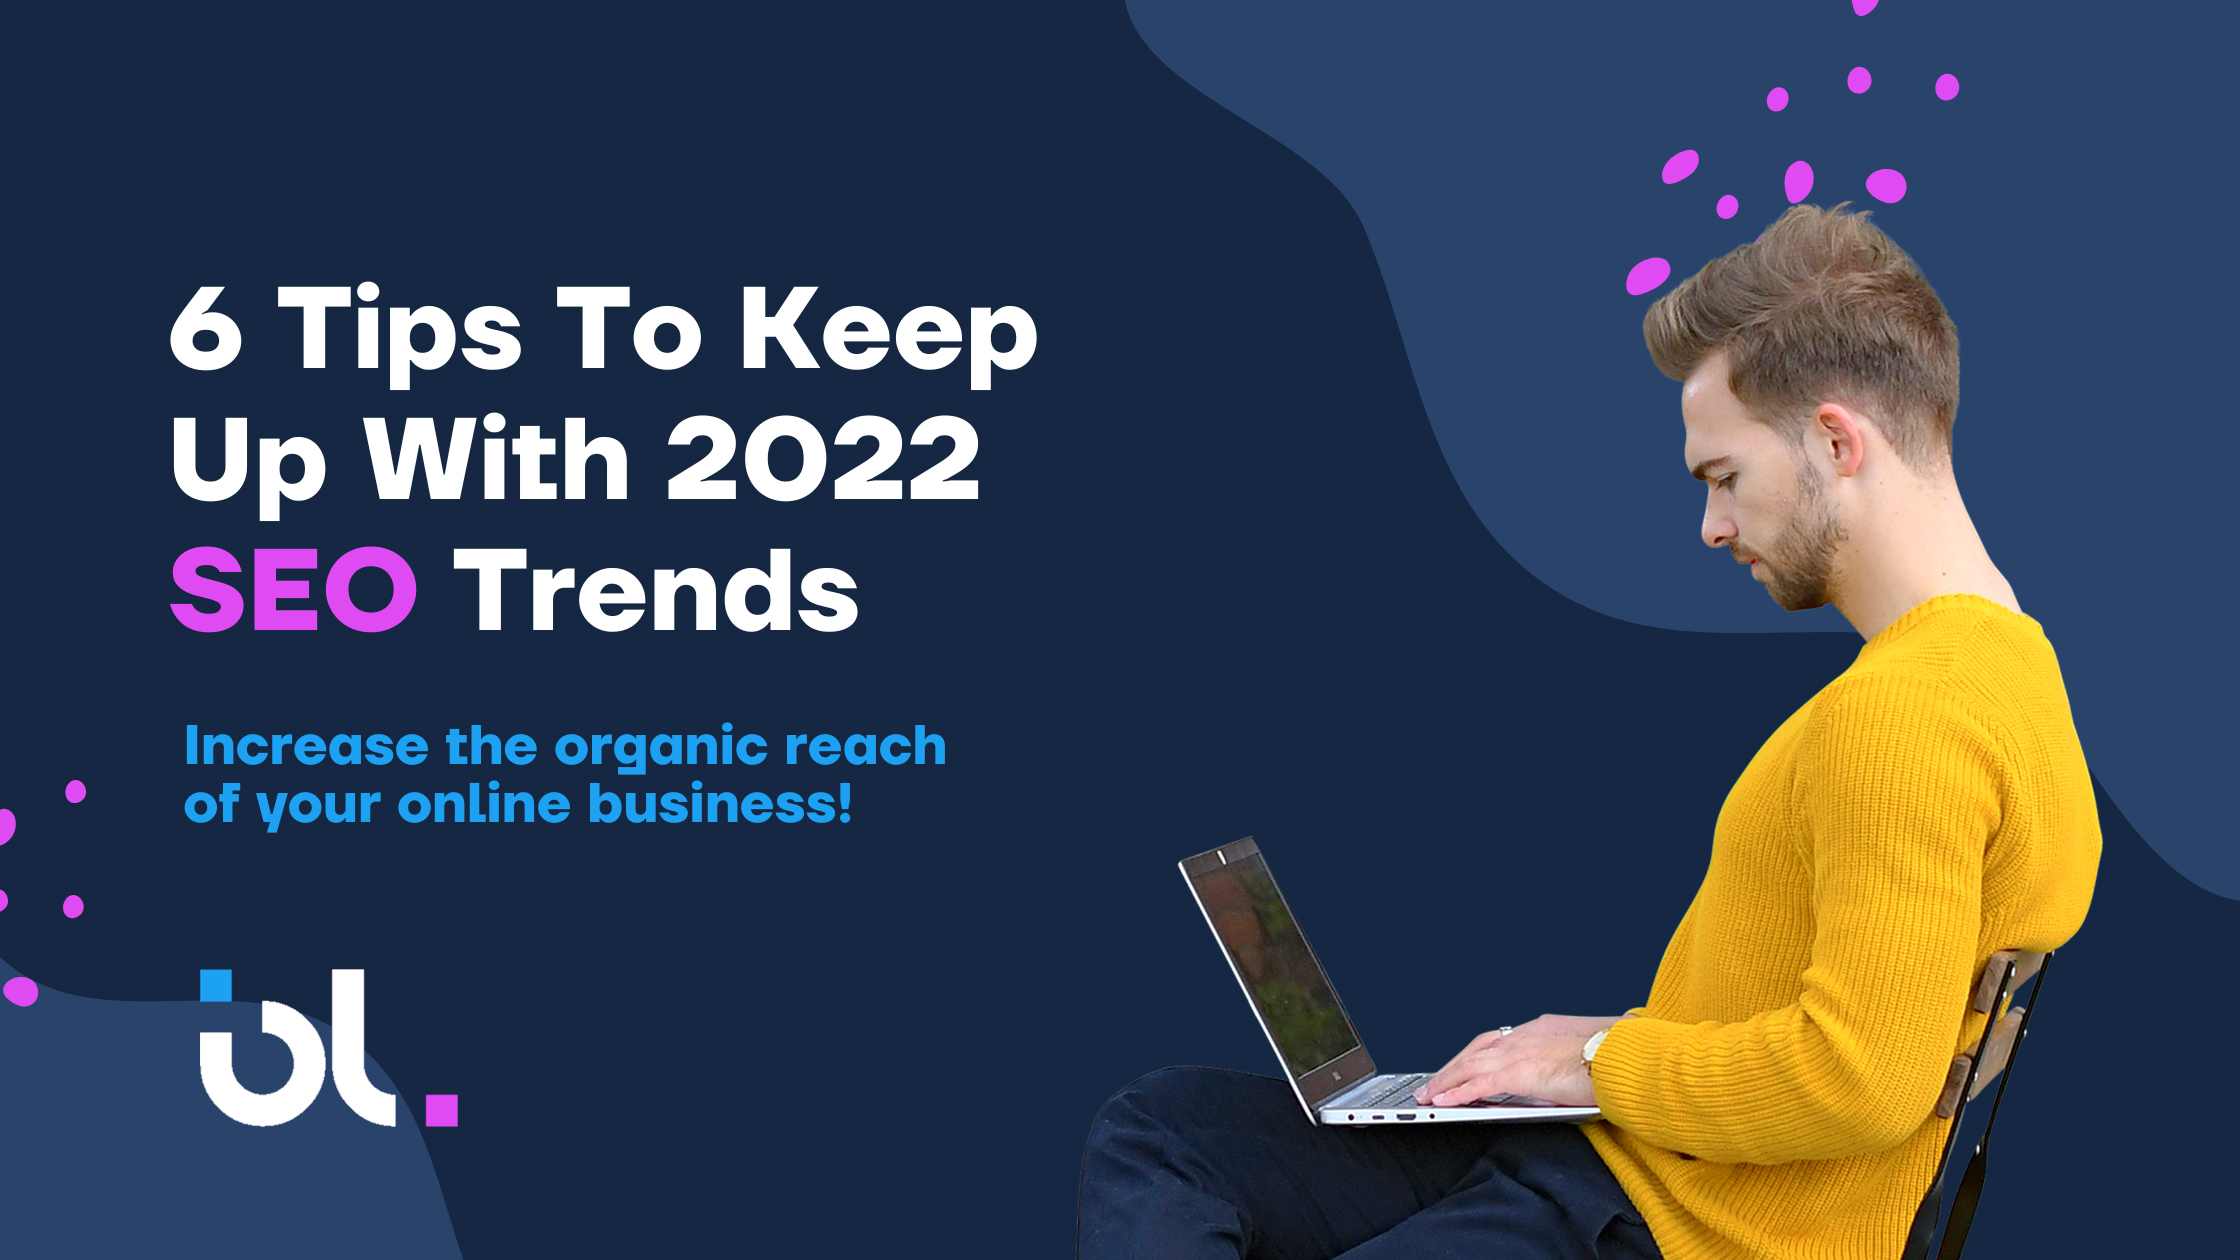 6 Tips to Keep Up with 2022 SEO Trends